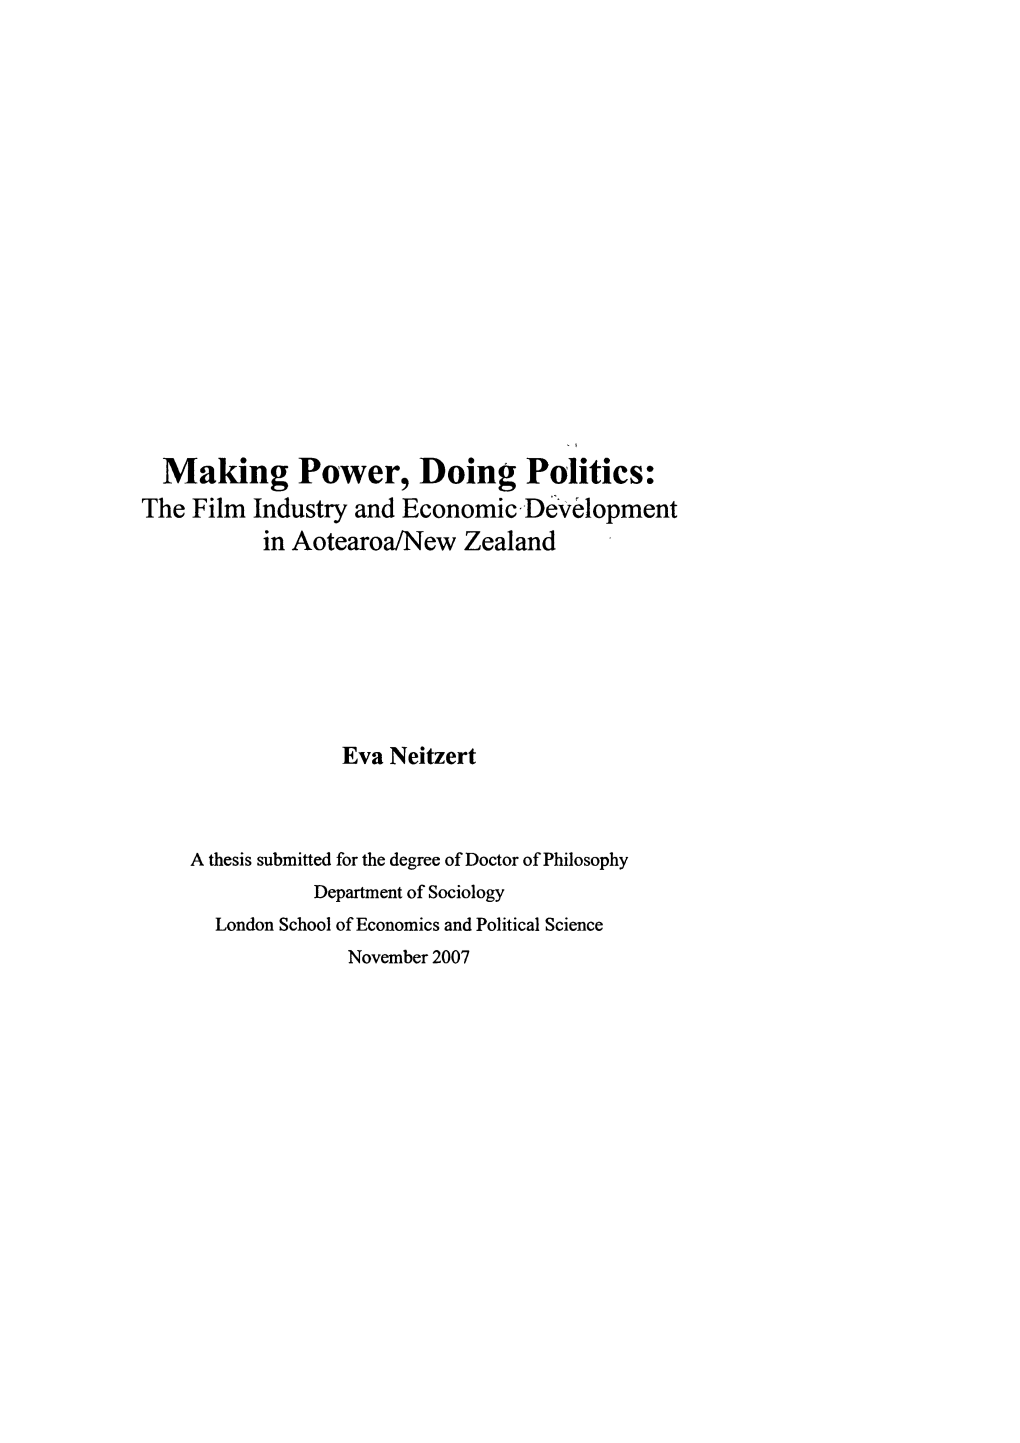 Making Power, Doing Politics • • the Film Industry and Economic Development in Aotearoa/New Zealand